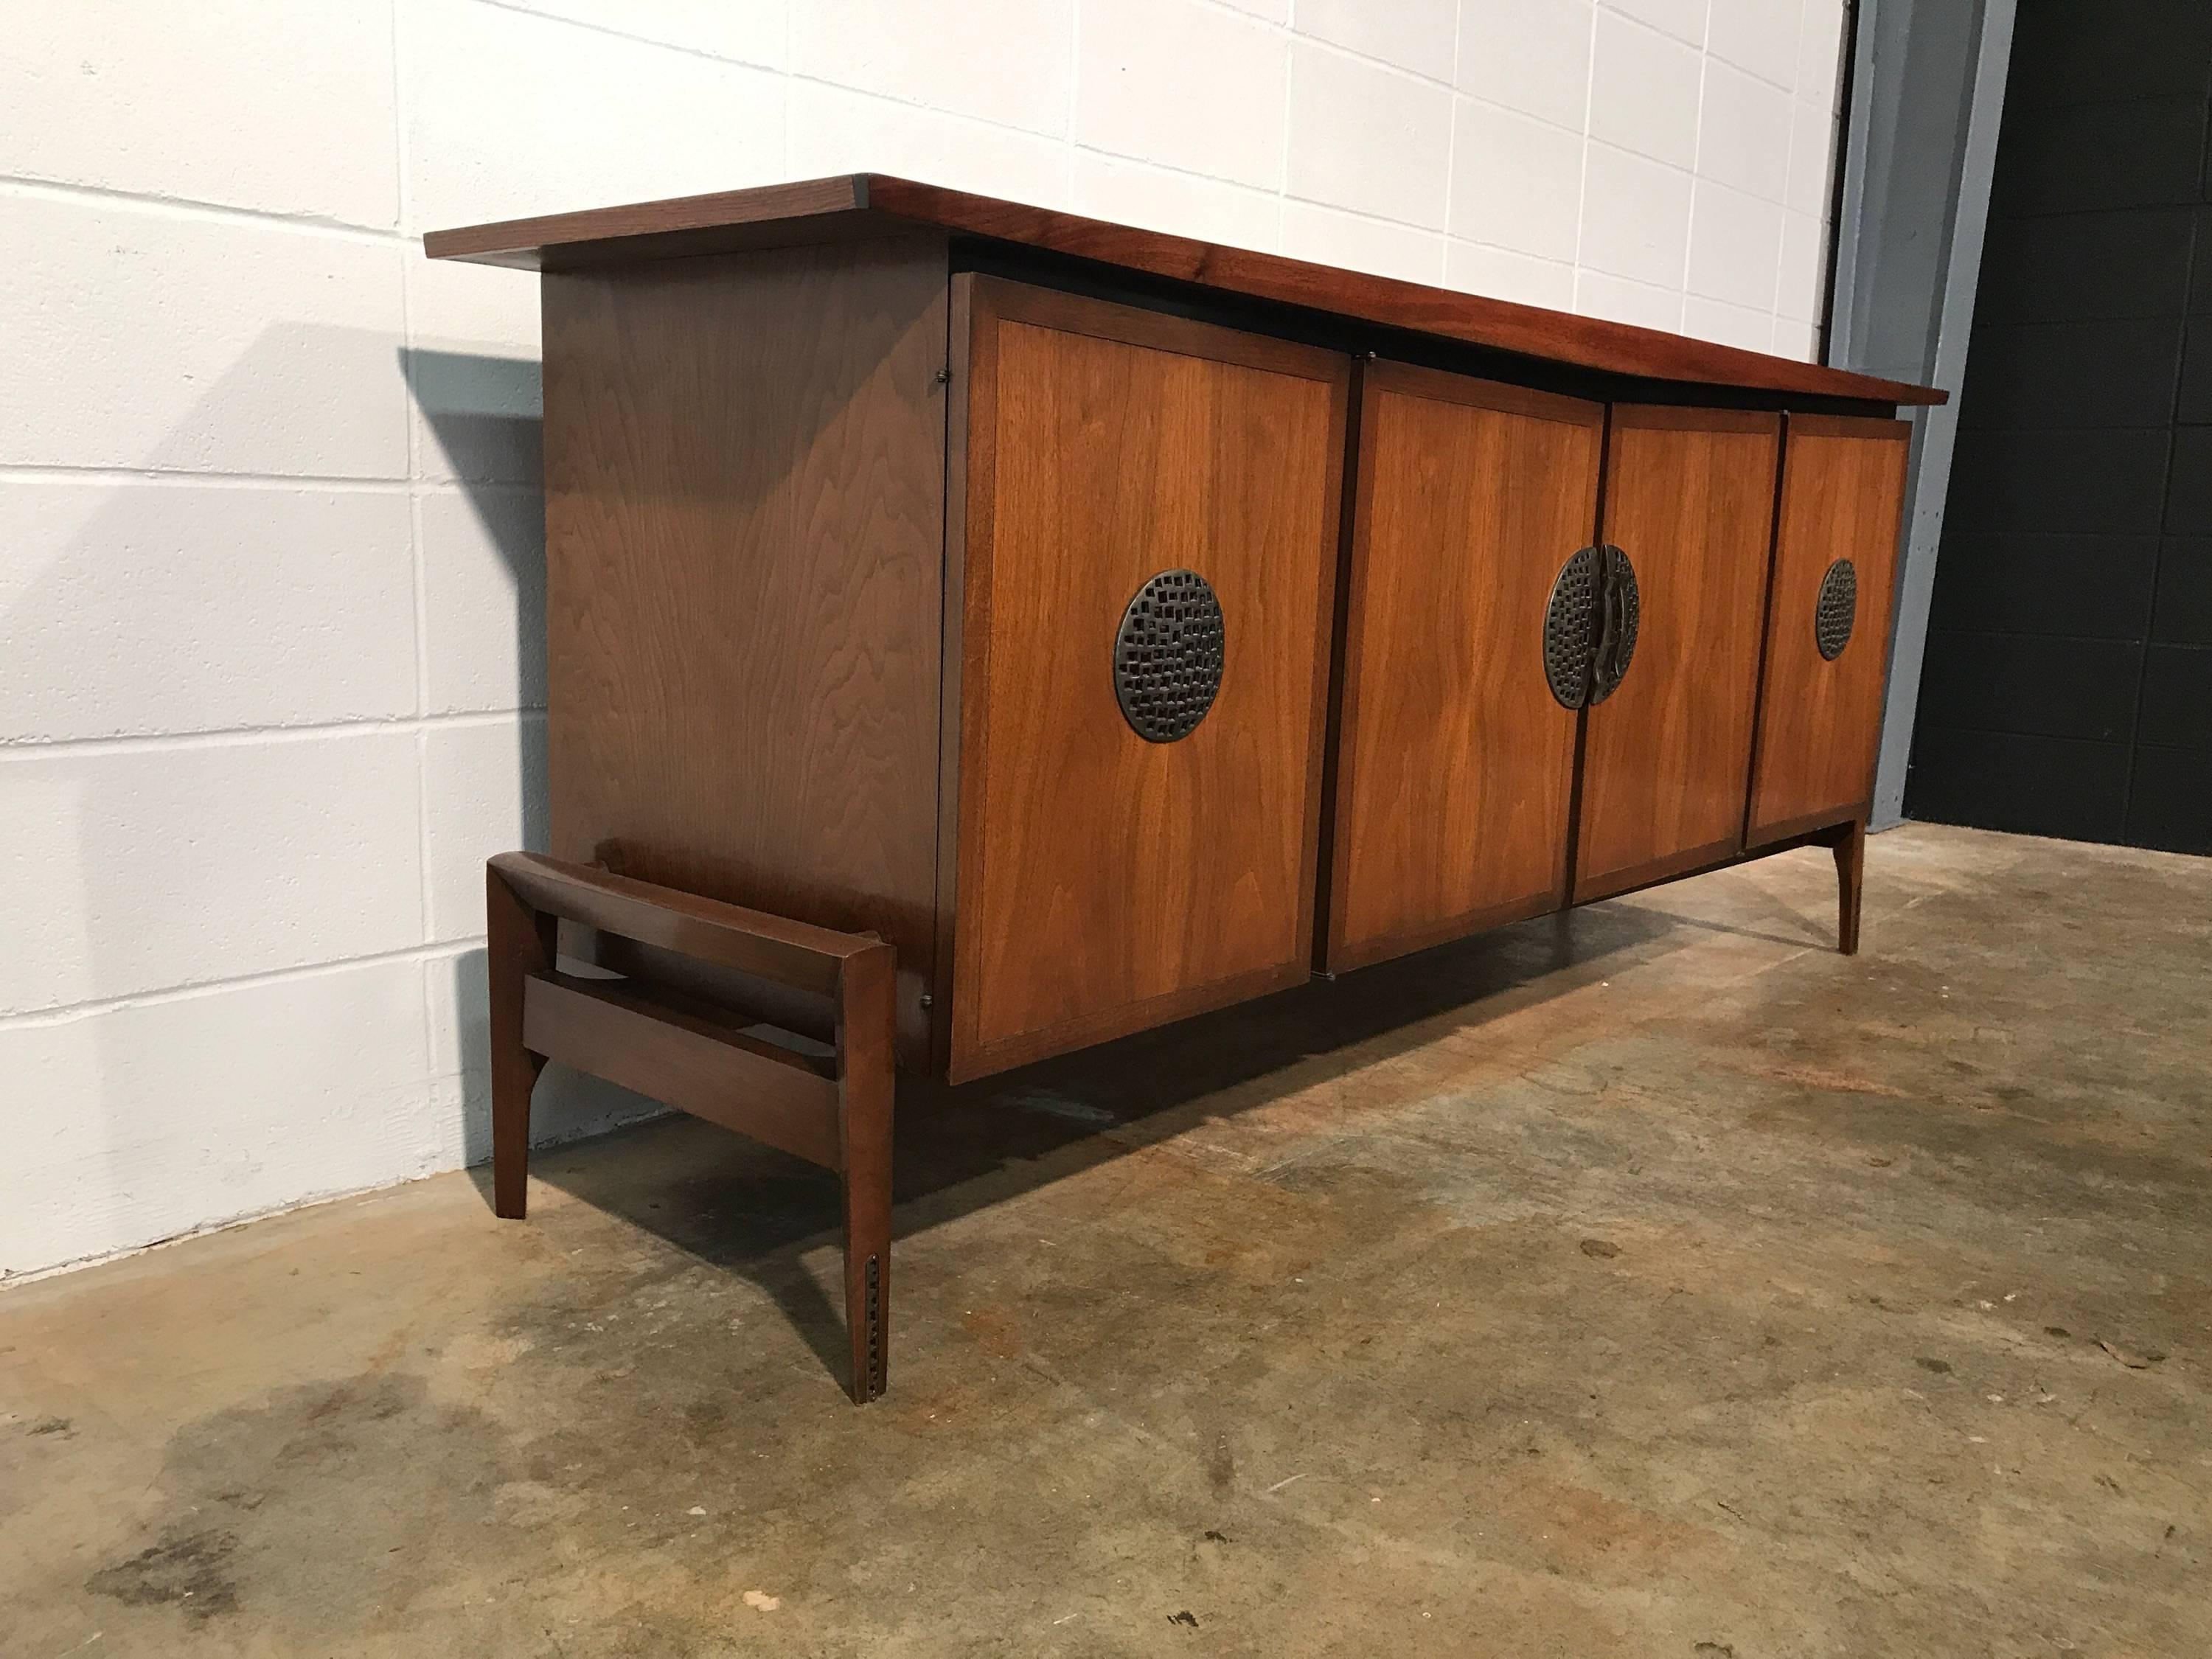 American Sophisticated Mid-Century Modern Credenza Asian Flair Hobey Helen Baker